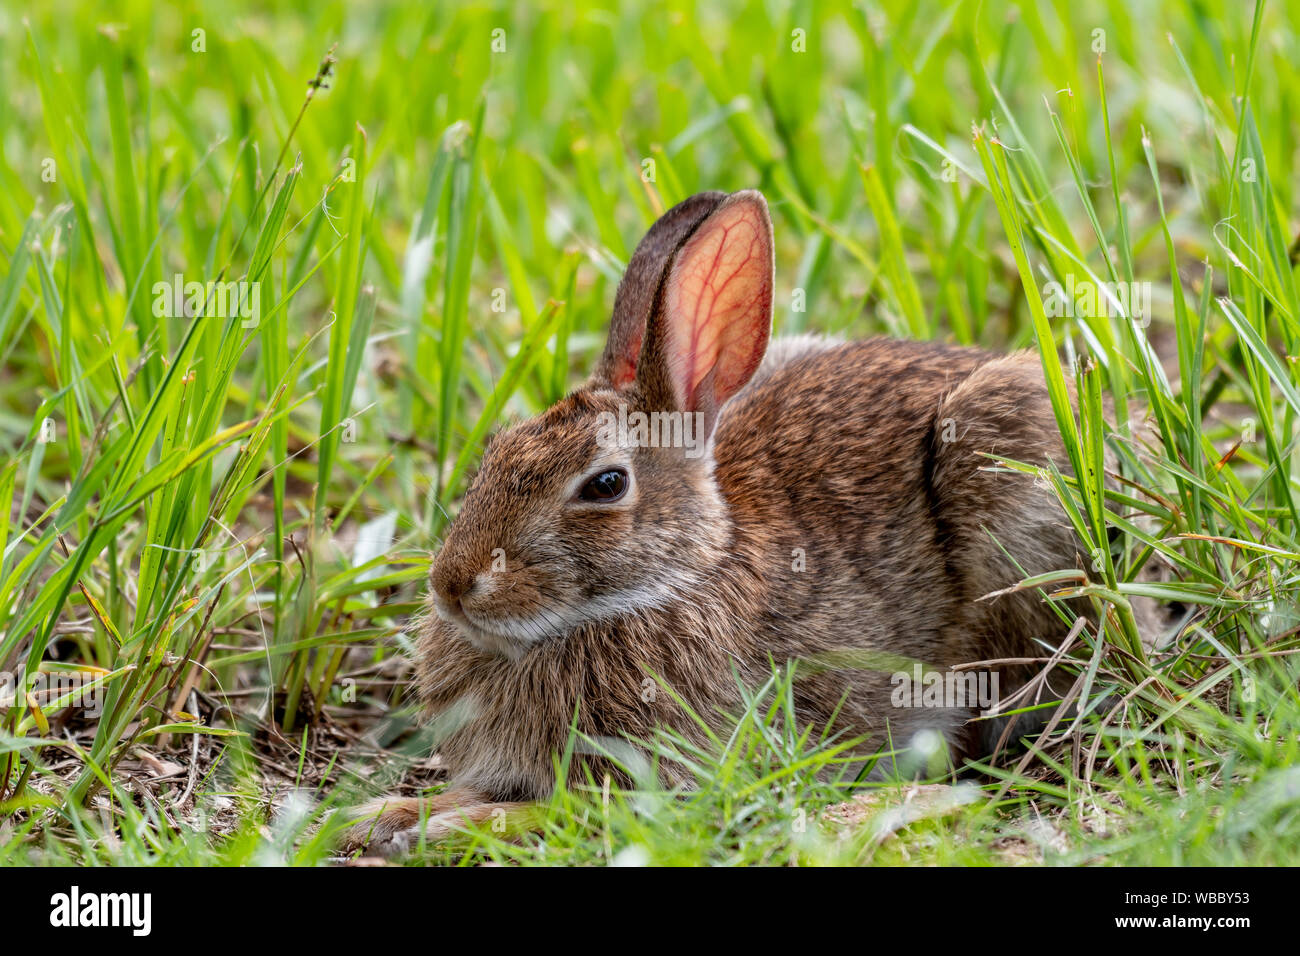 Young bunny in the grass - Florida wildlife Stock Photo